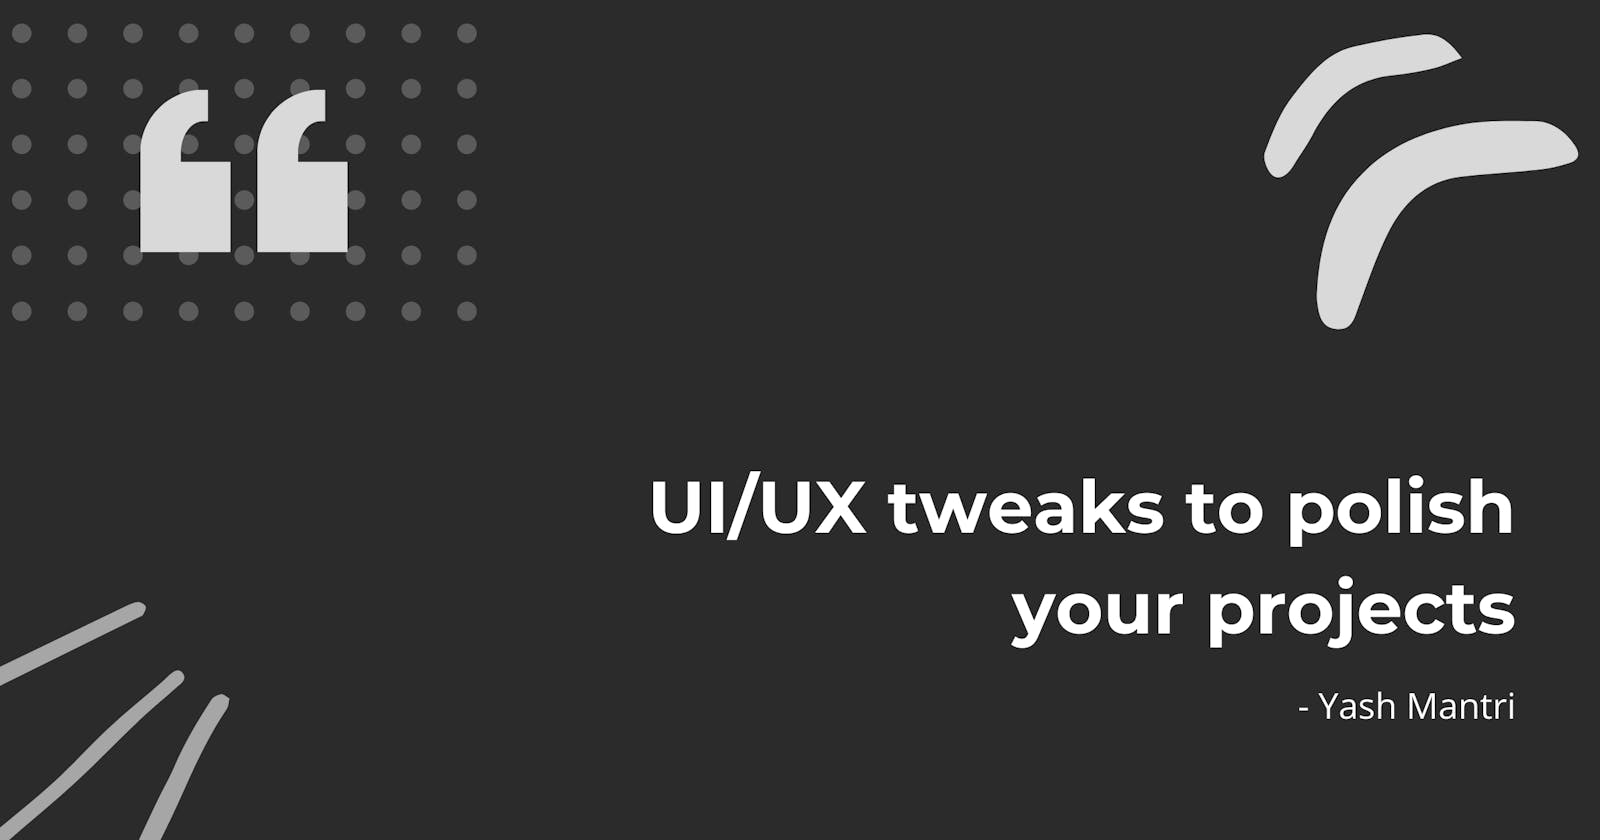 UI/UX tweaks to polish your projects